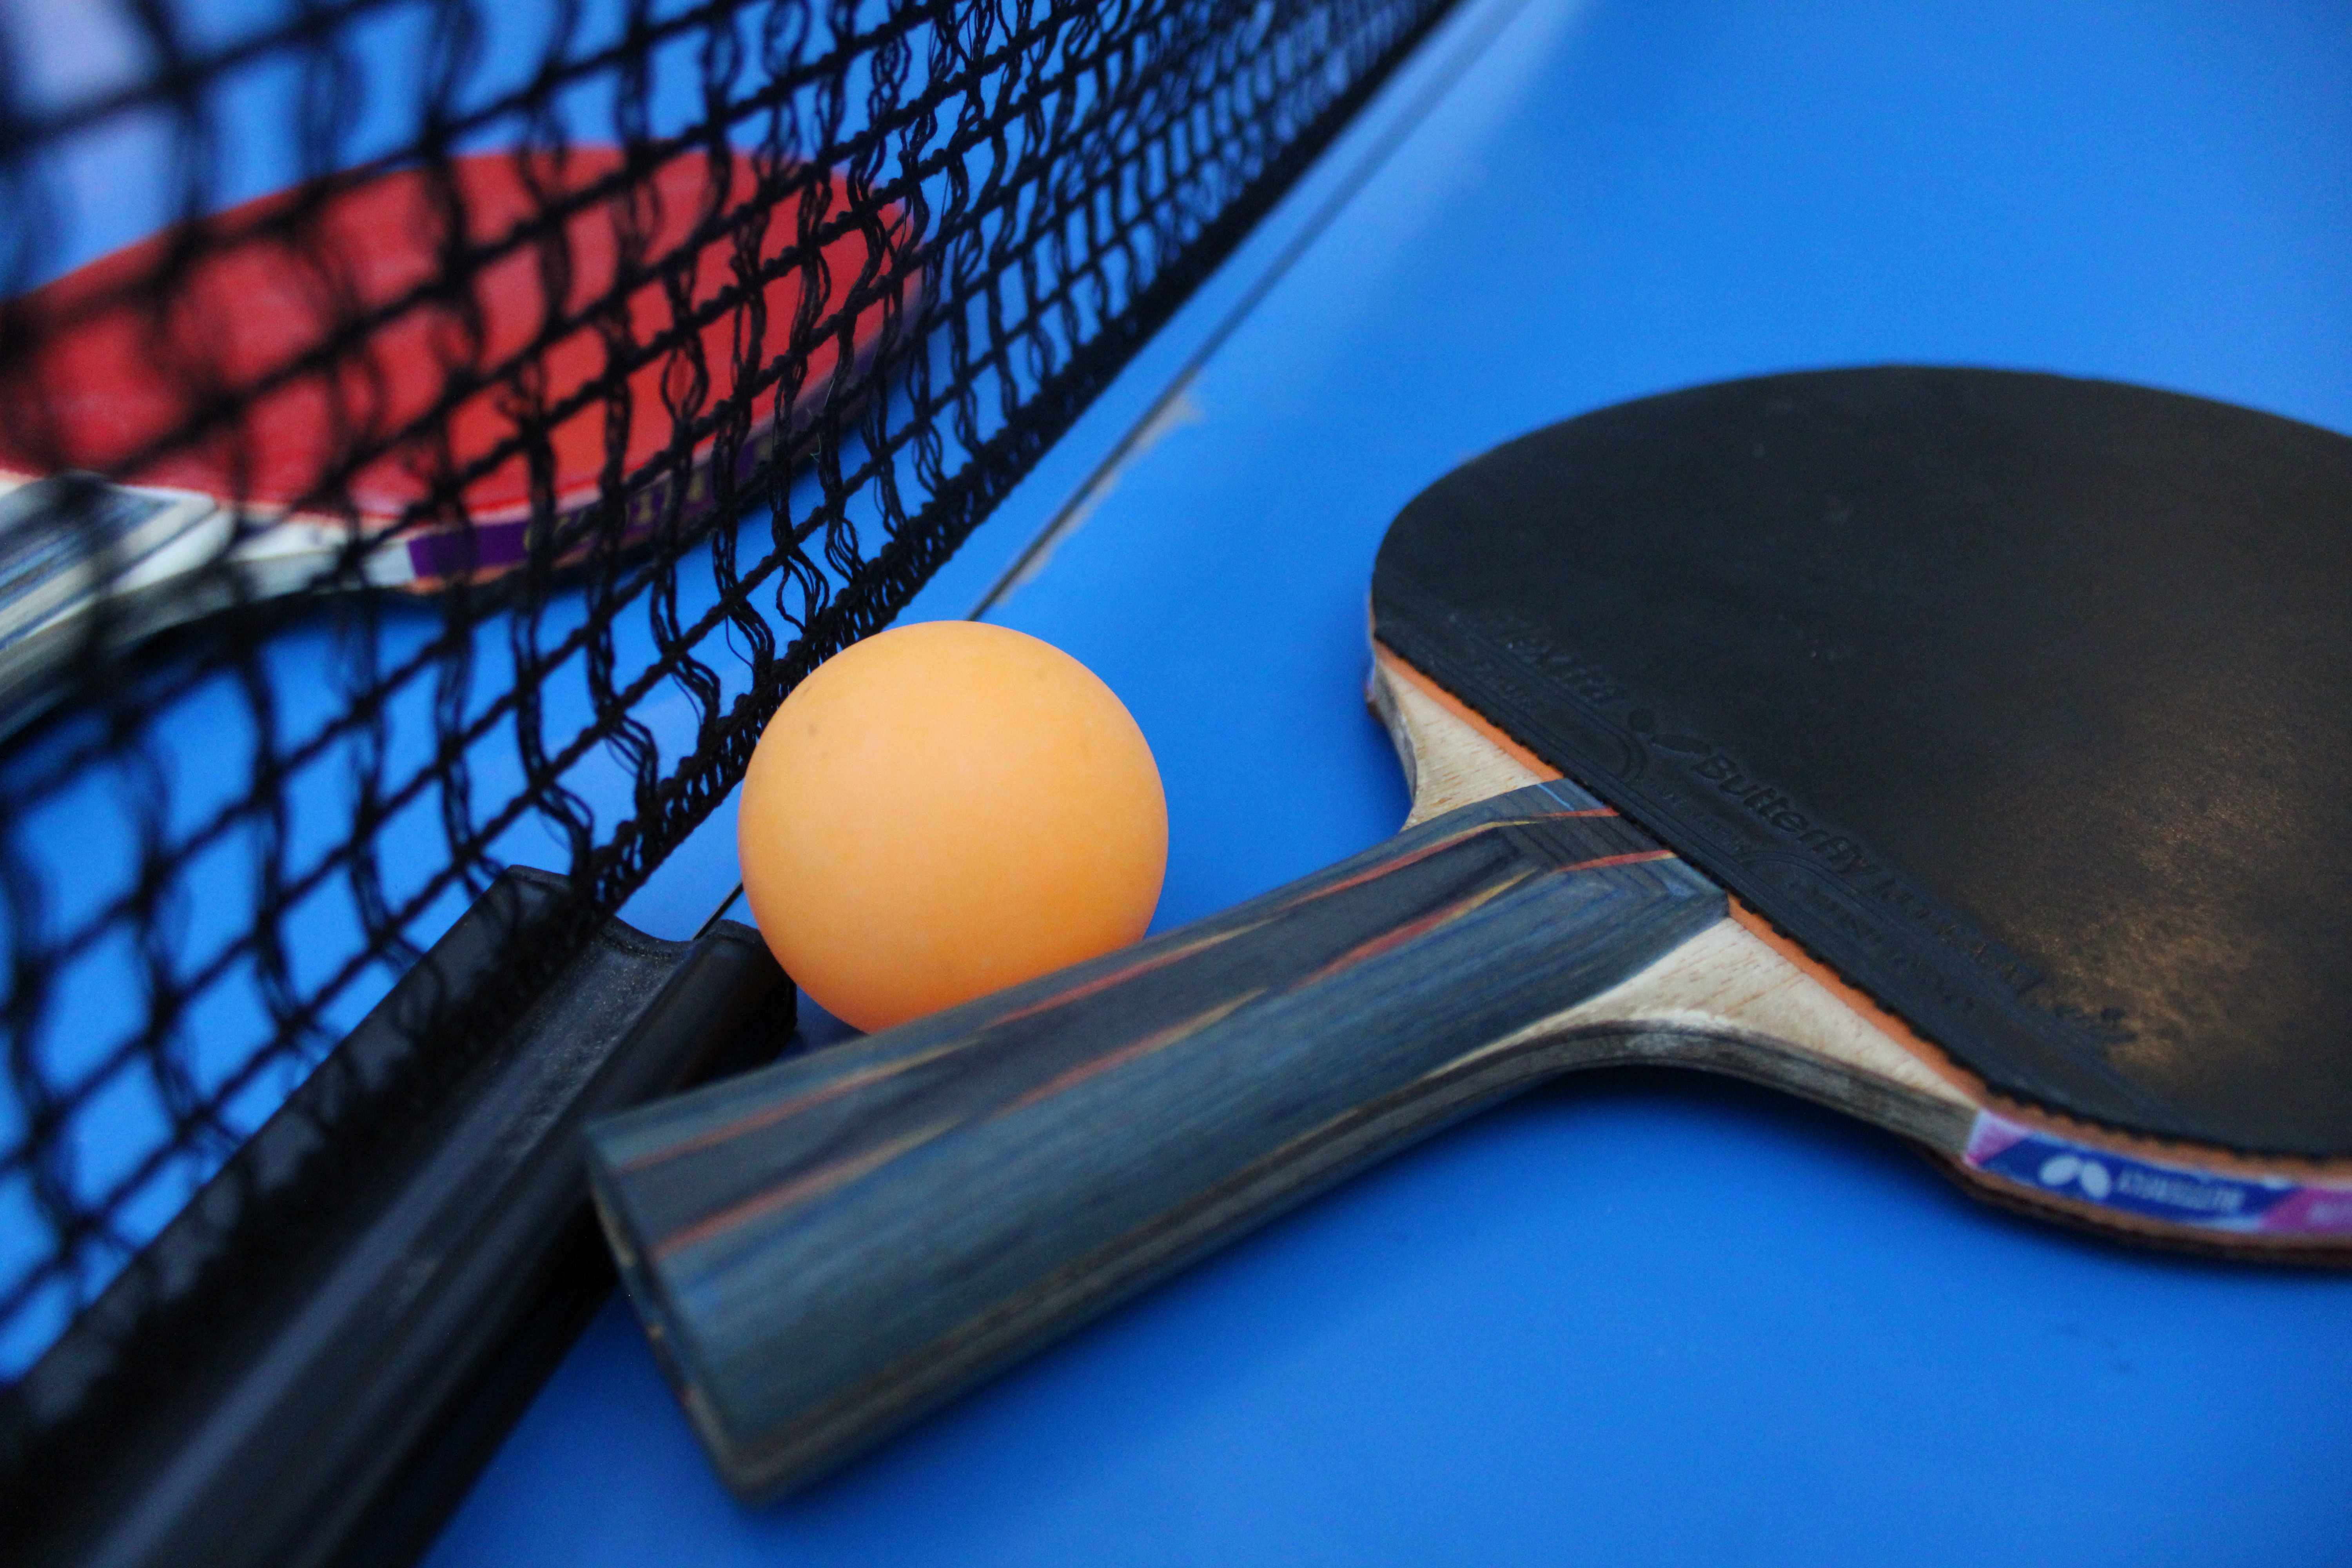 The future of athletics? Smart ping pong paddles. - Advanced Science News